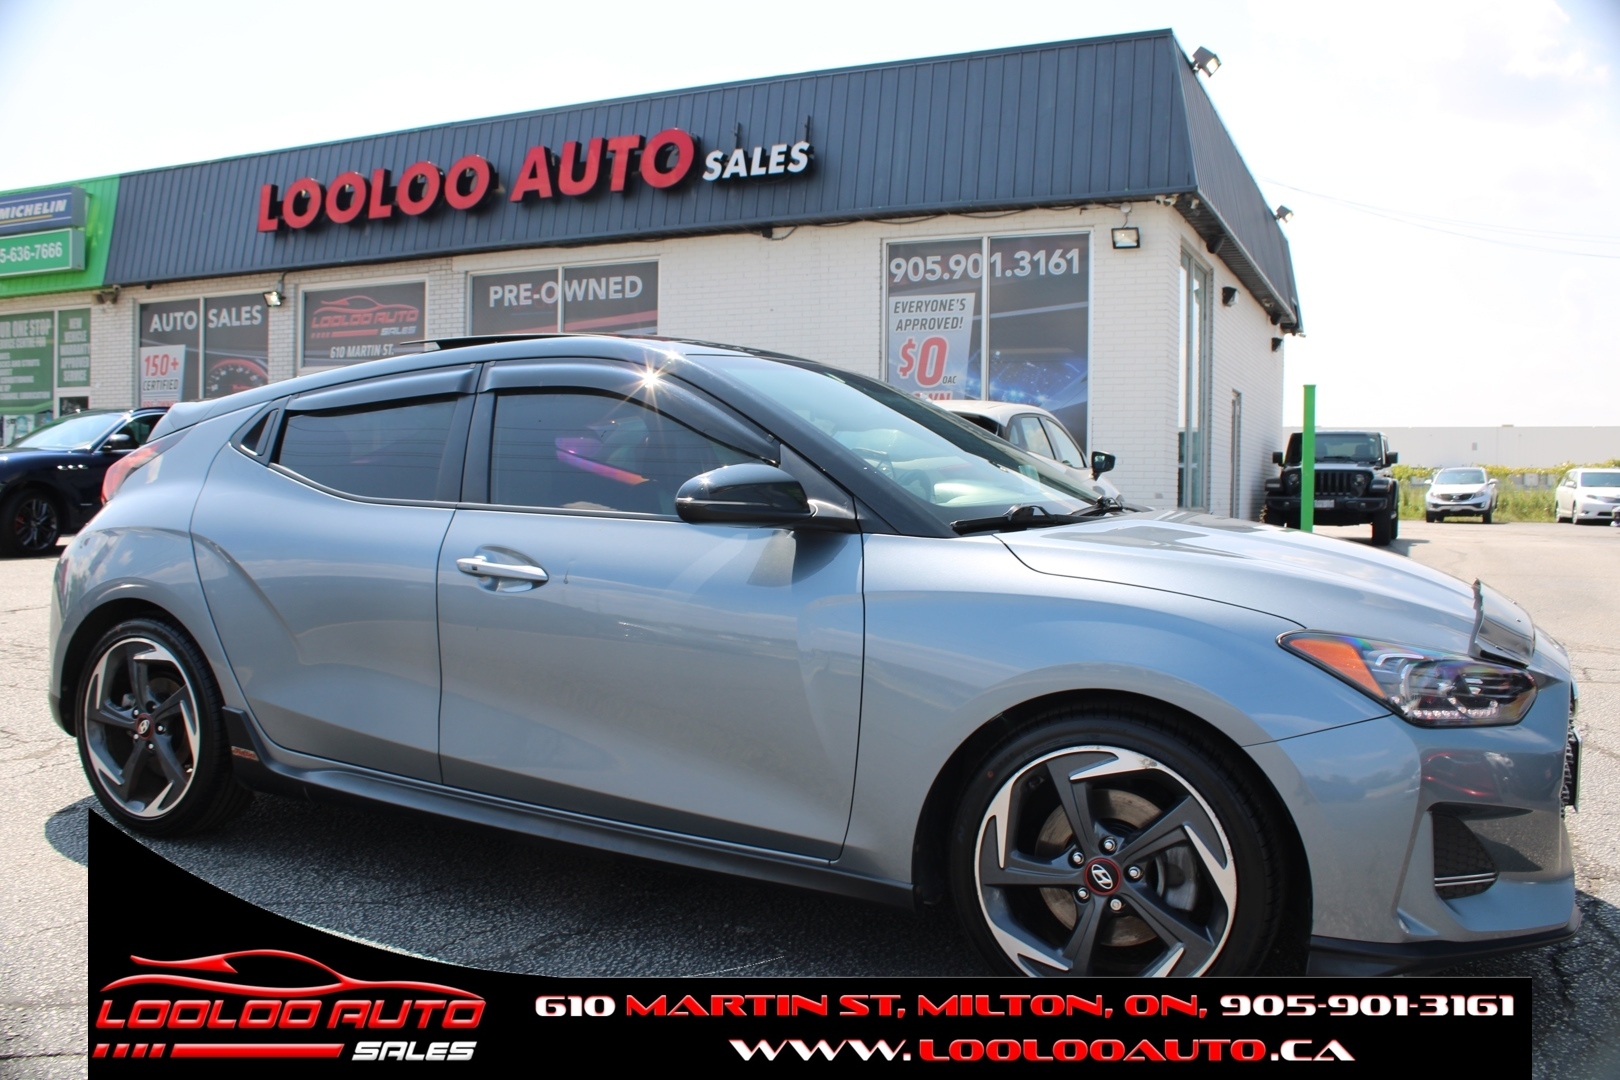 2019 Hyundai Veloster Turbo1.6L R-Spec Heads Up Display $77/Weekly Certi